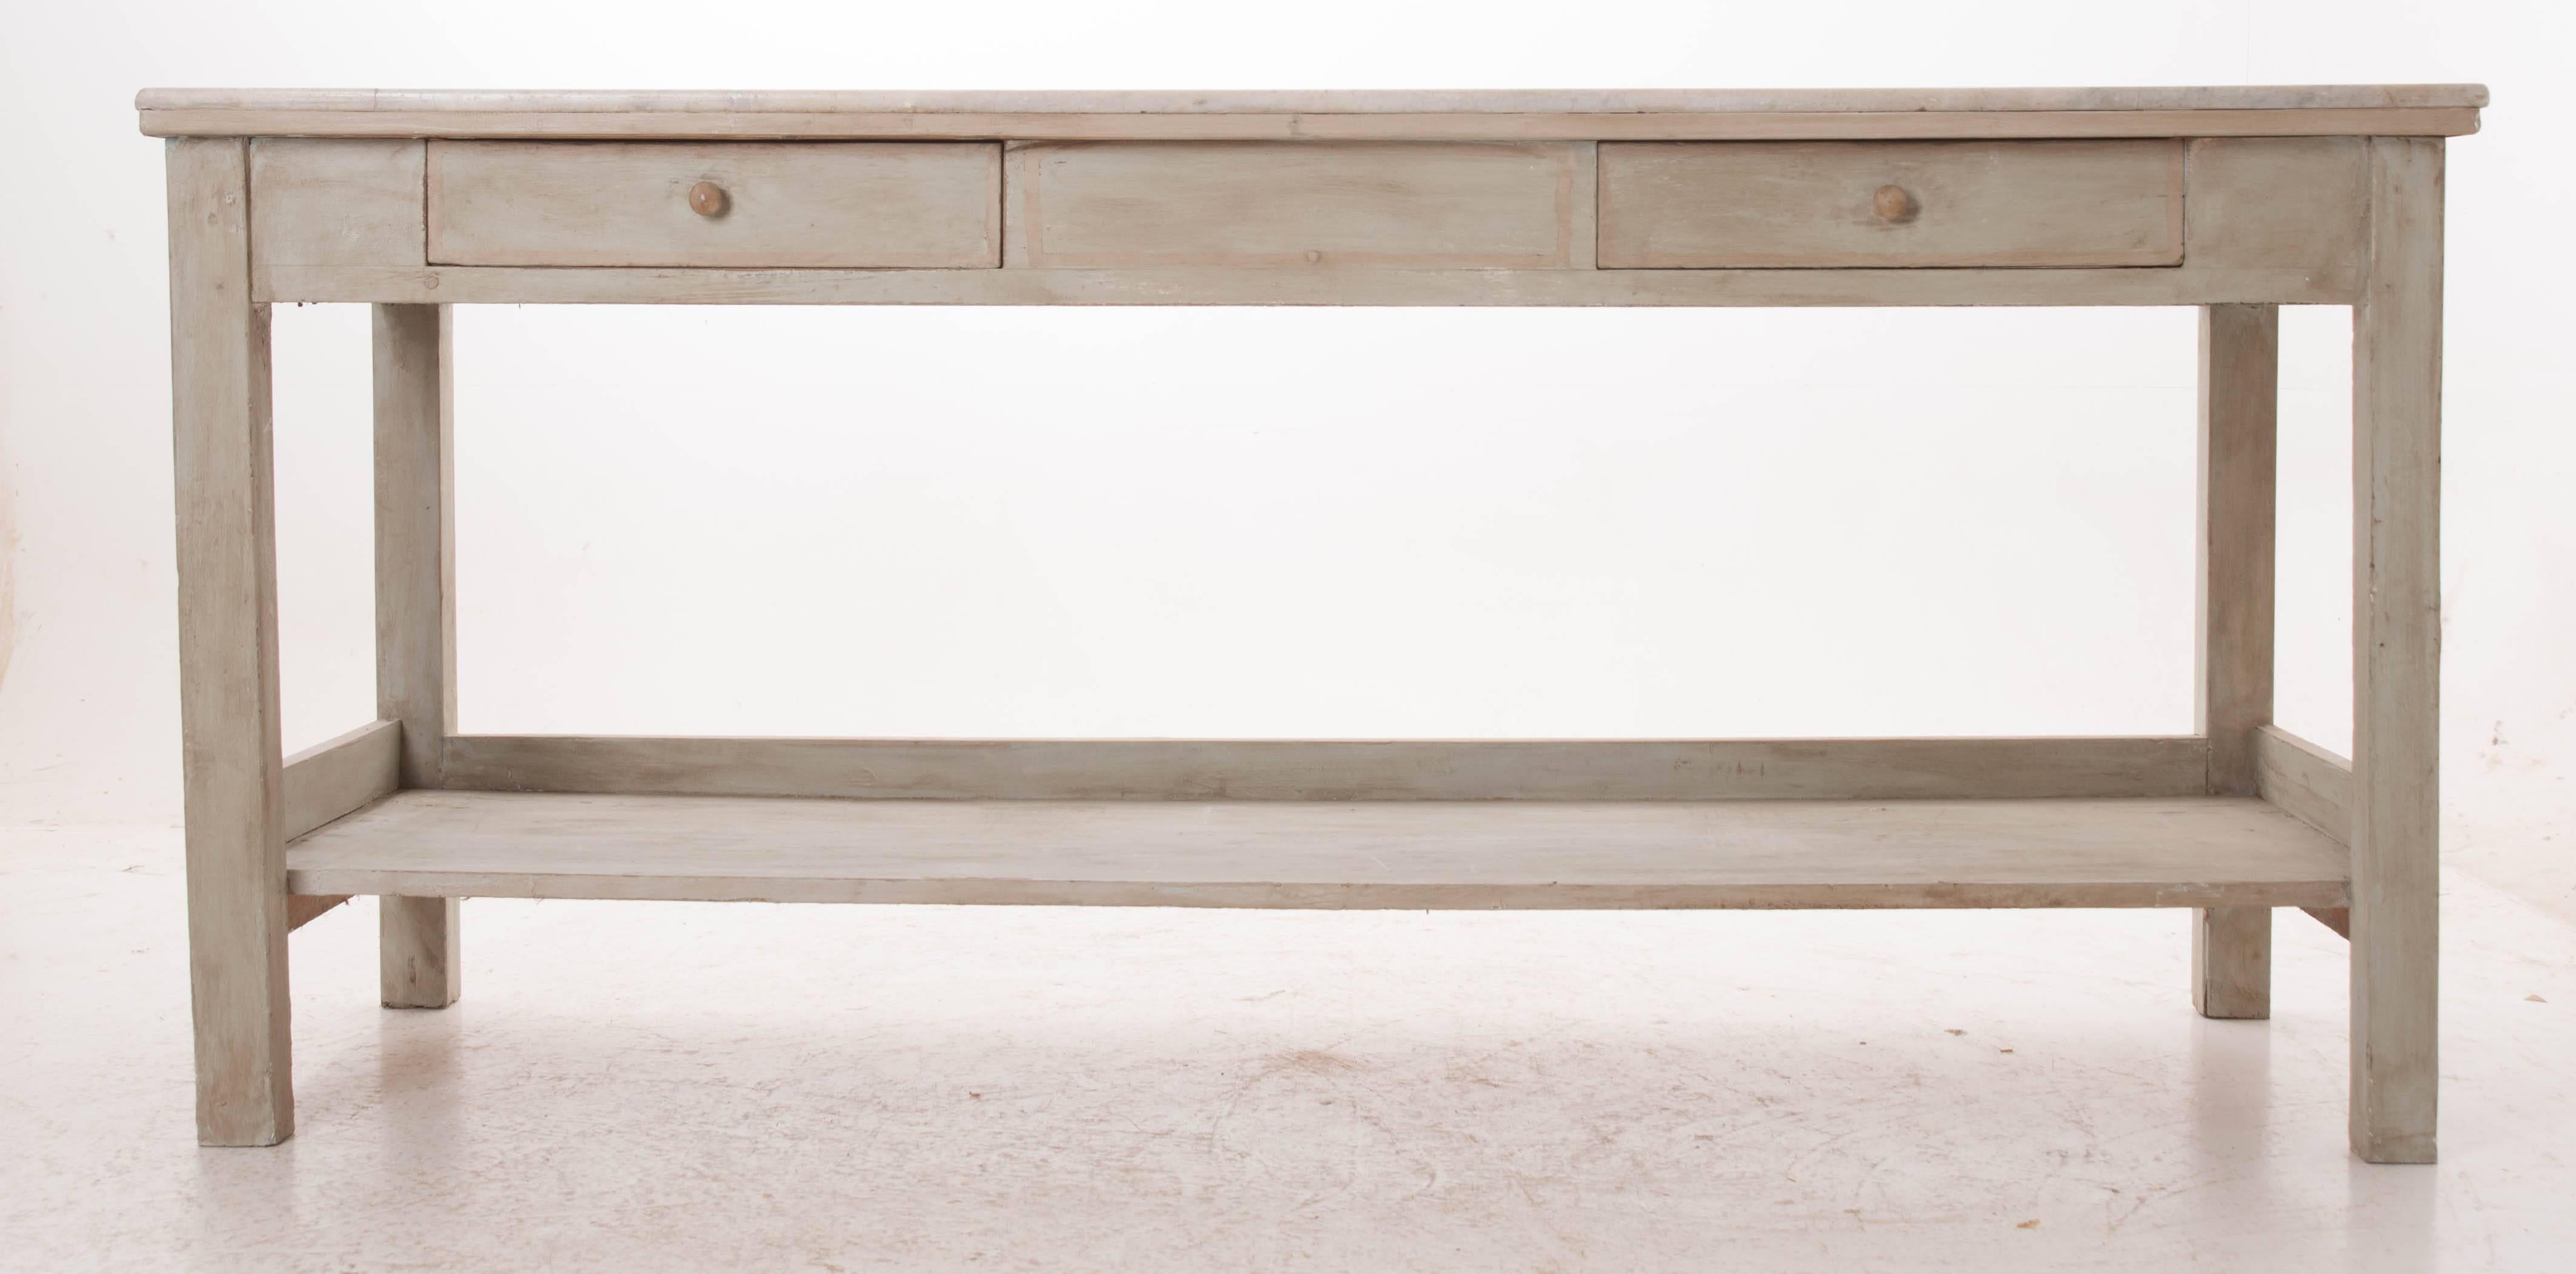 A stunning piece of antique white marble was affixed to a more recently painted base to create this perfectly suited baker's work table. The apron houses two drawers for out of sight storage, while an undertier shelf below allows for additional